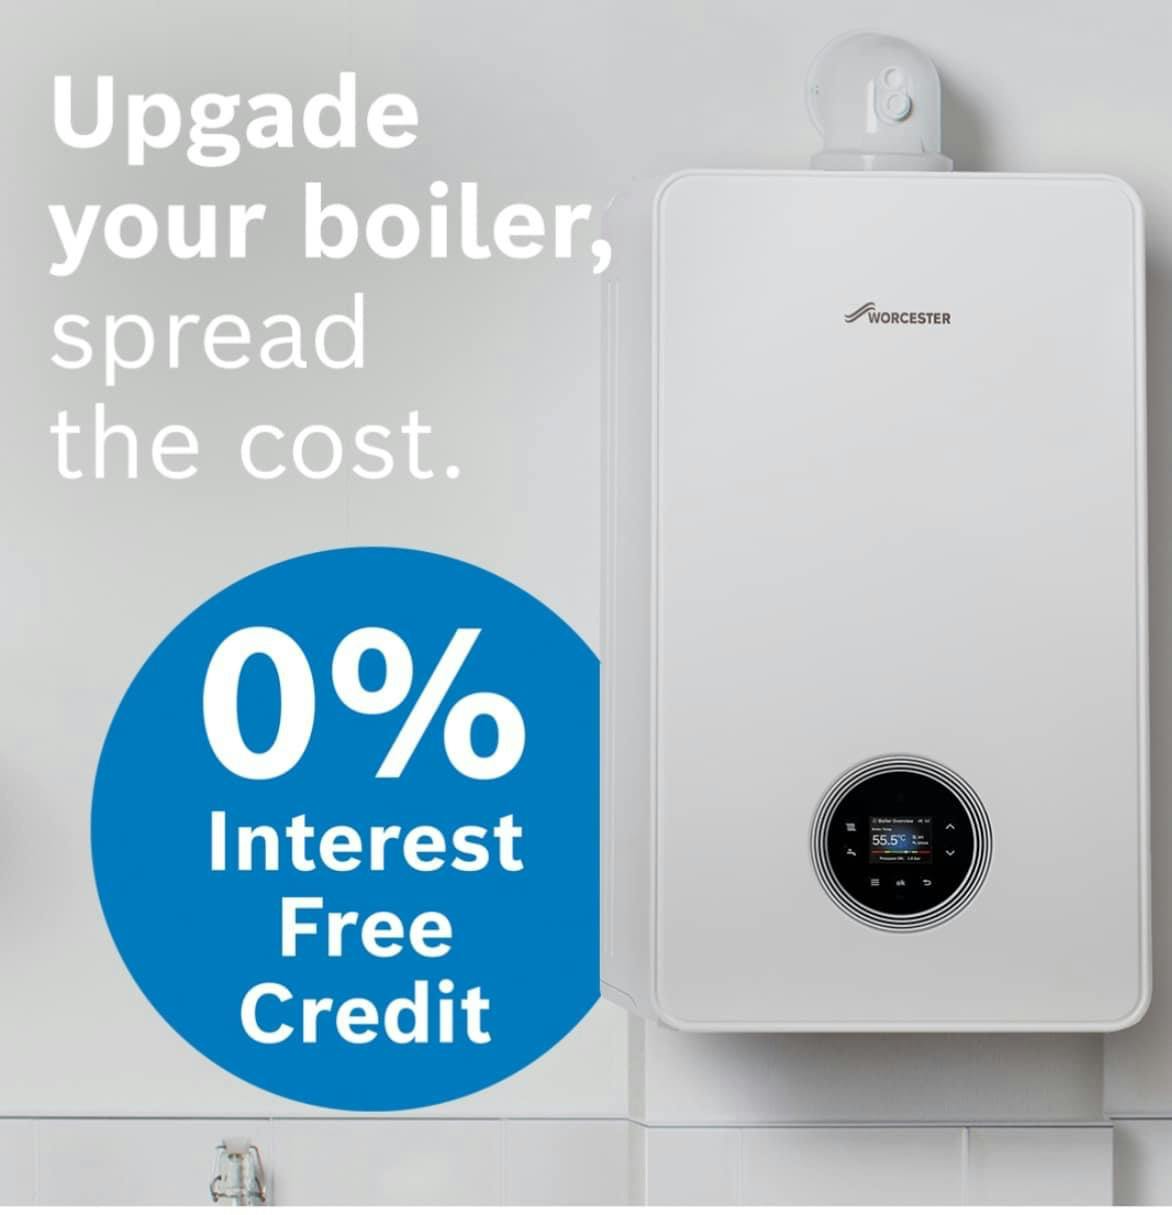 SPREAD THE COST OF A NEW BOILER